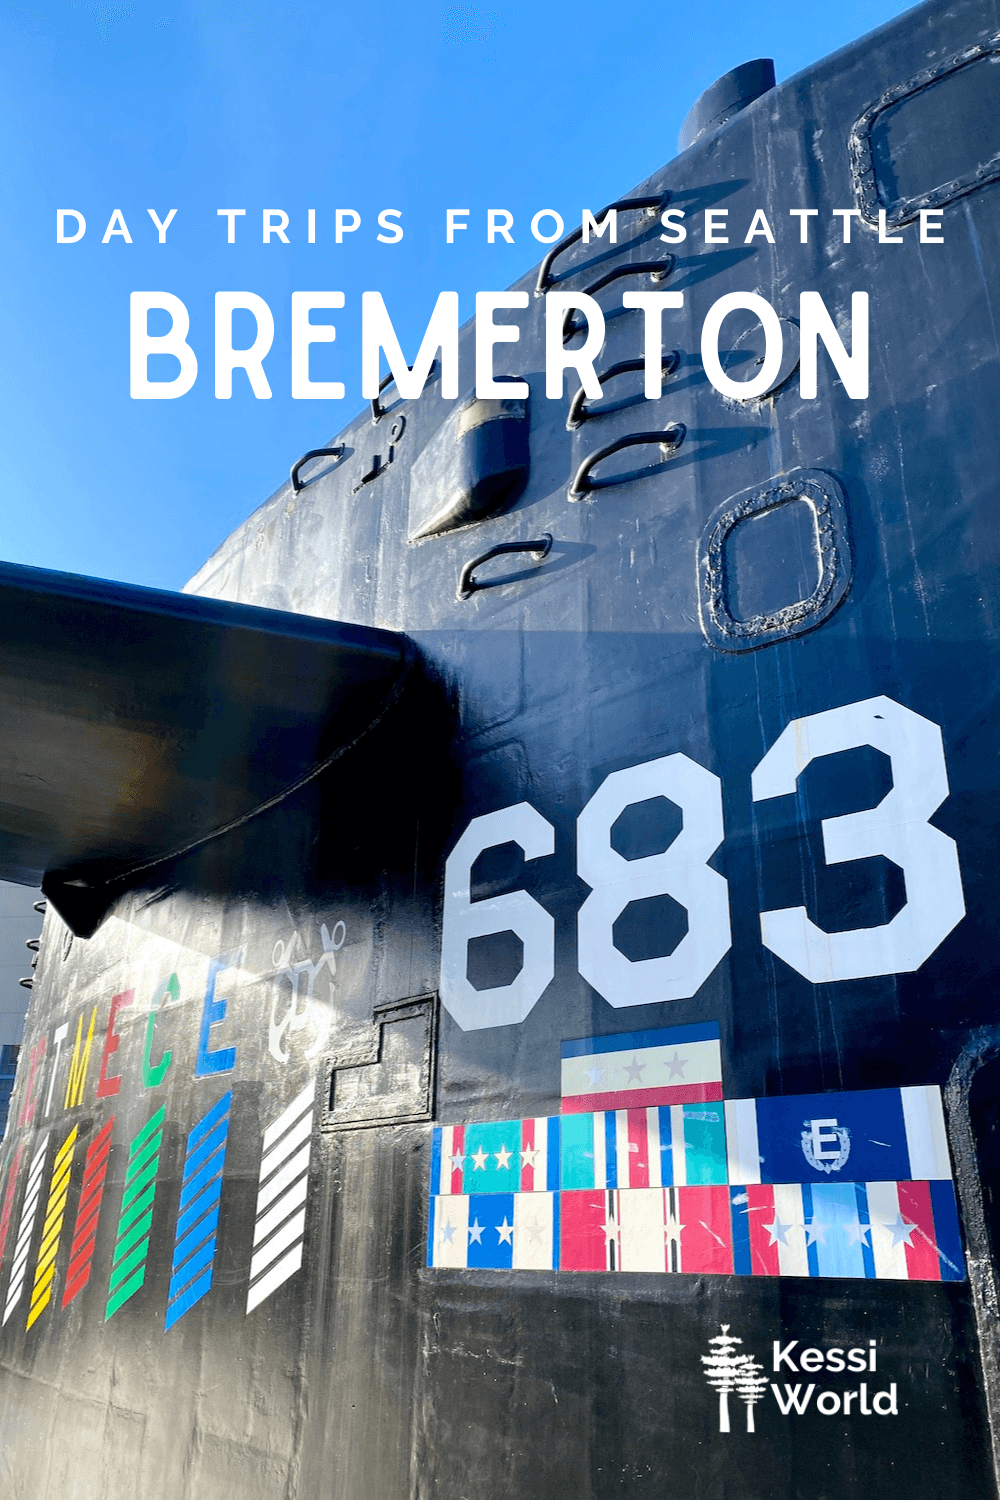 This Pinterest pin displays white letters that read "day trips from Seattle" and highlights Bremerton. The photo is the top of a decommissioned submarine with bright white letters that show the number of the vessel and colorful award ribbons painted onto the shining black finish.